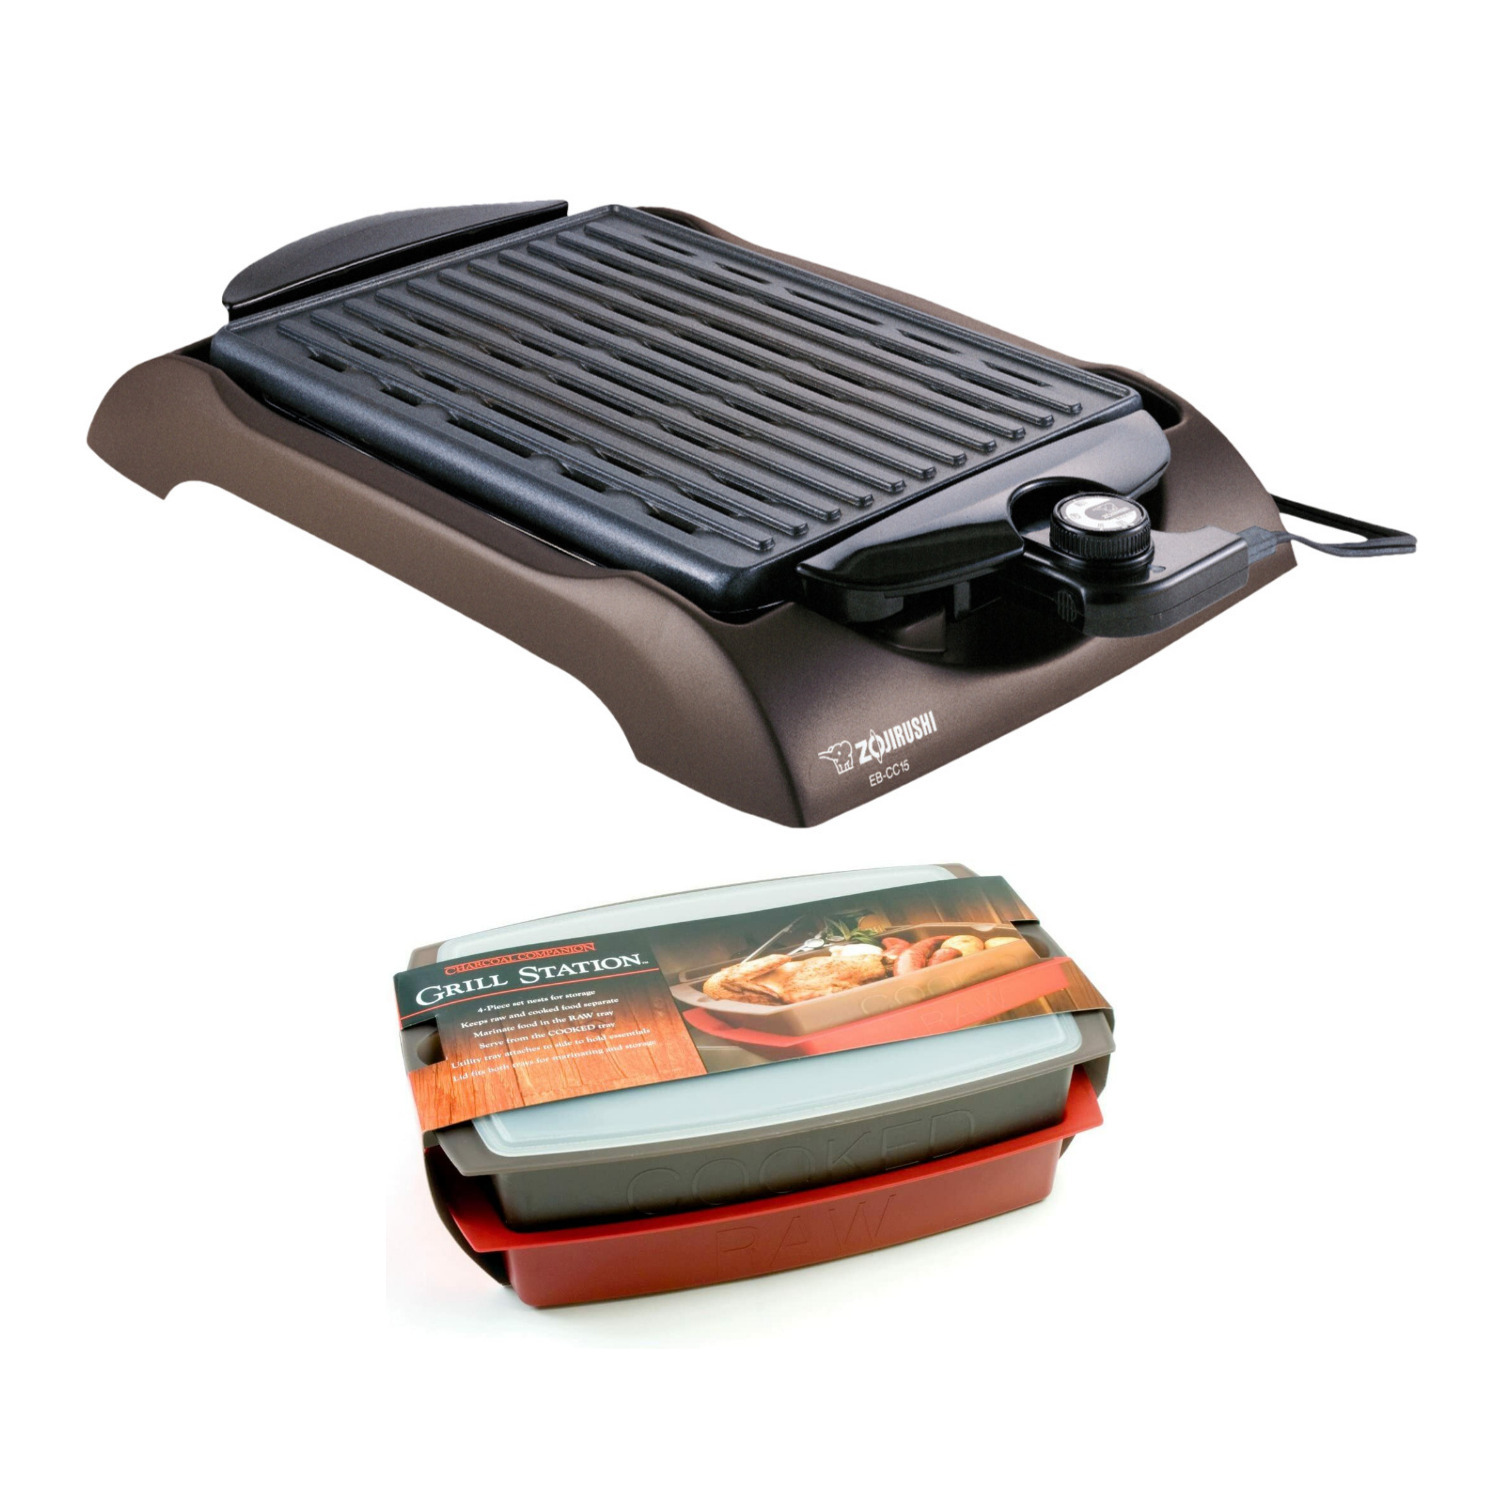 Zojirushi EB-CC15 Indoor Electric Grill with Grill Station - image 1 of 7